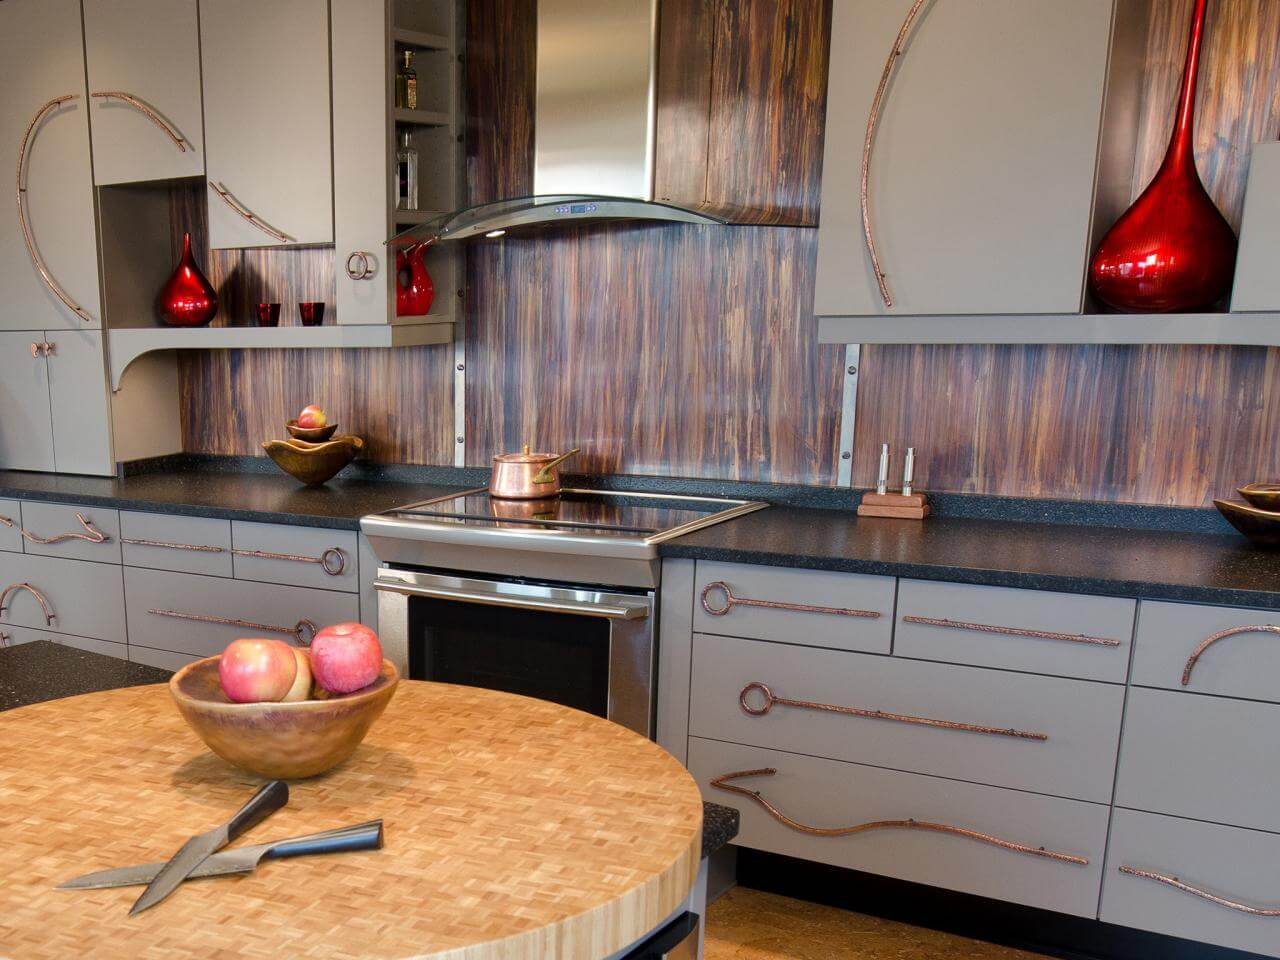 Lively kitchen cabinet doors